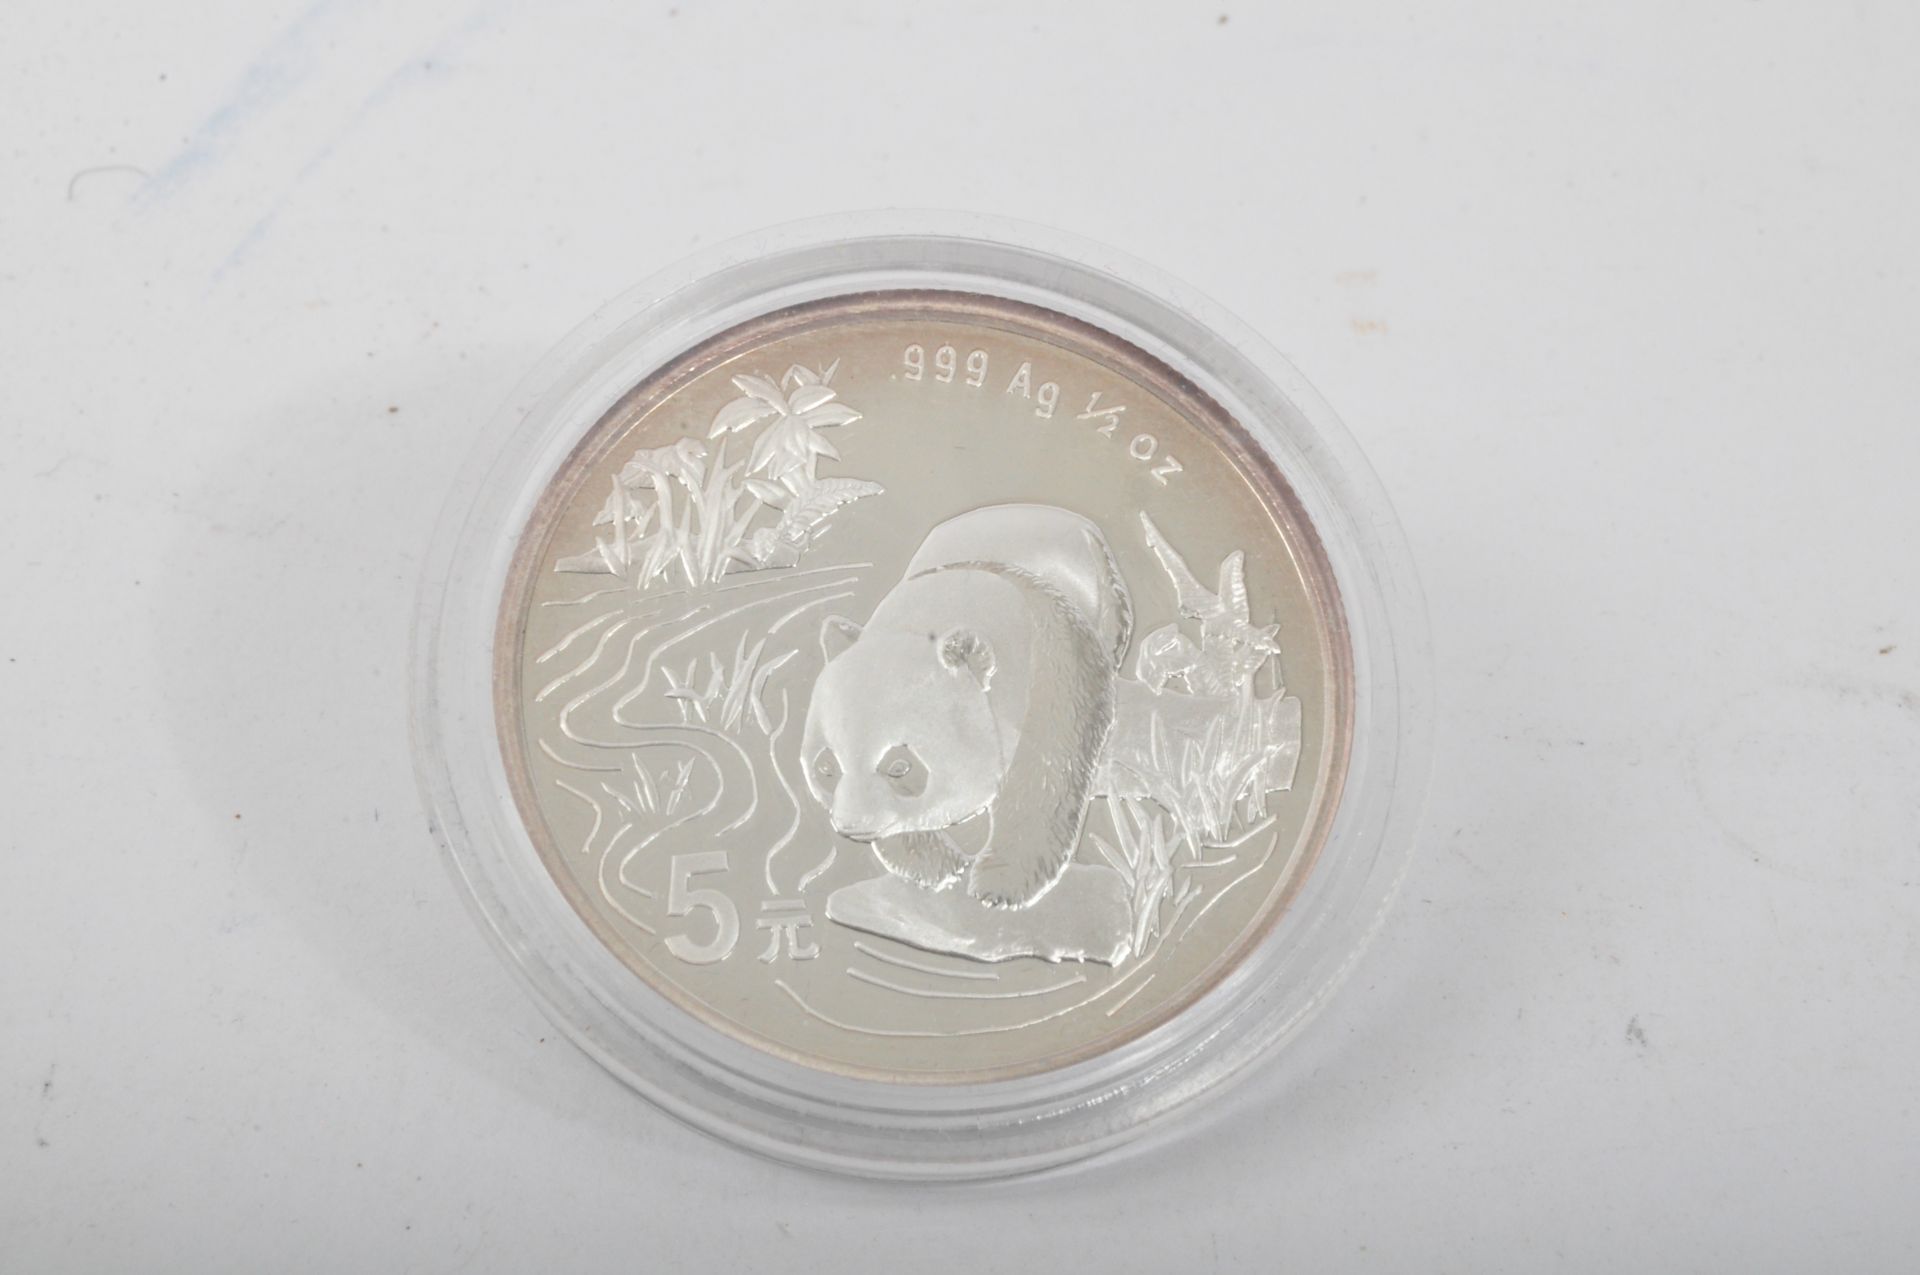 WESTMINSTER COLLECTION - PANDA CHINA SILVER COIN COLLECTION - Bild 35 aus 41